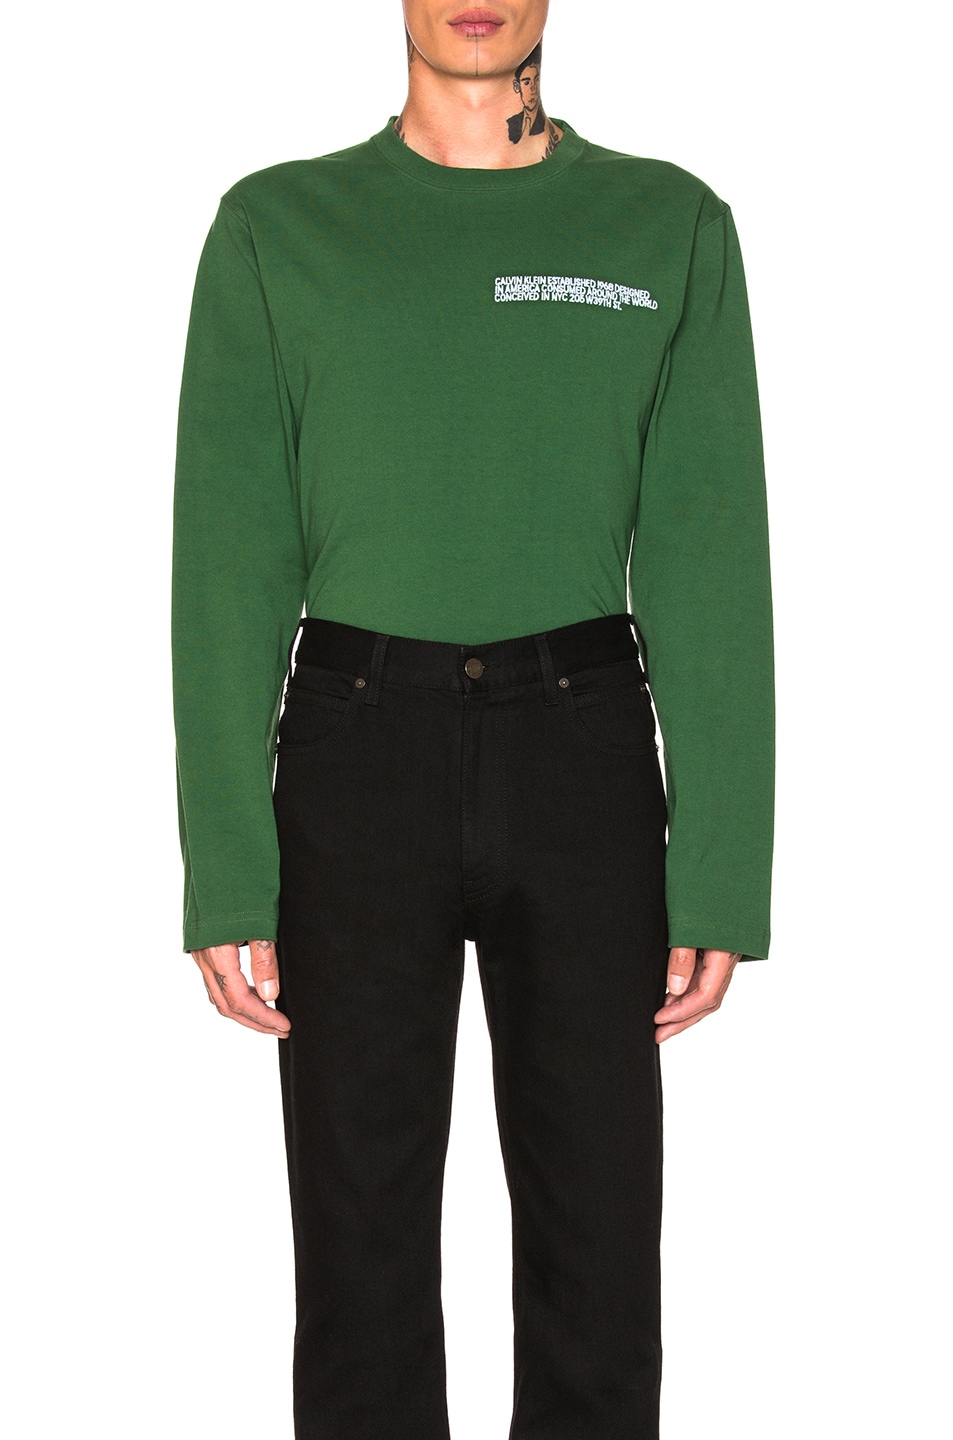 Image 1 of CALVIN KLEIN 205W39NYC Script Long Sleeve Tee in Bright Moss